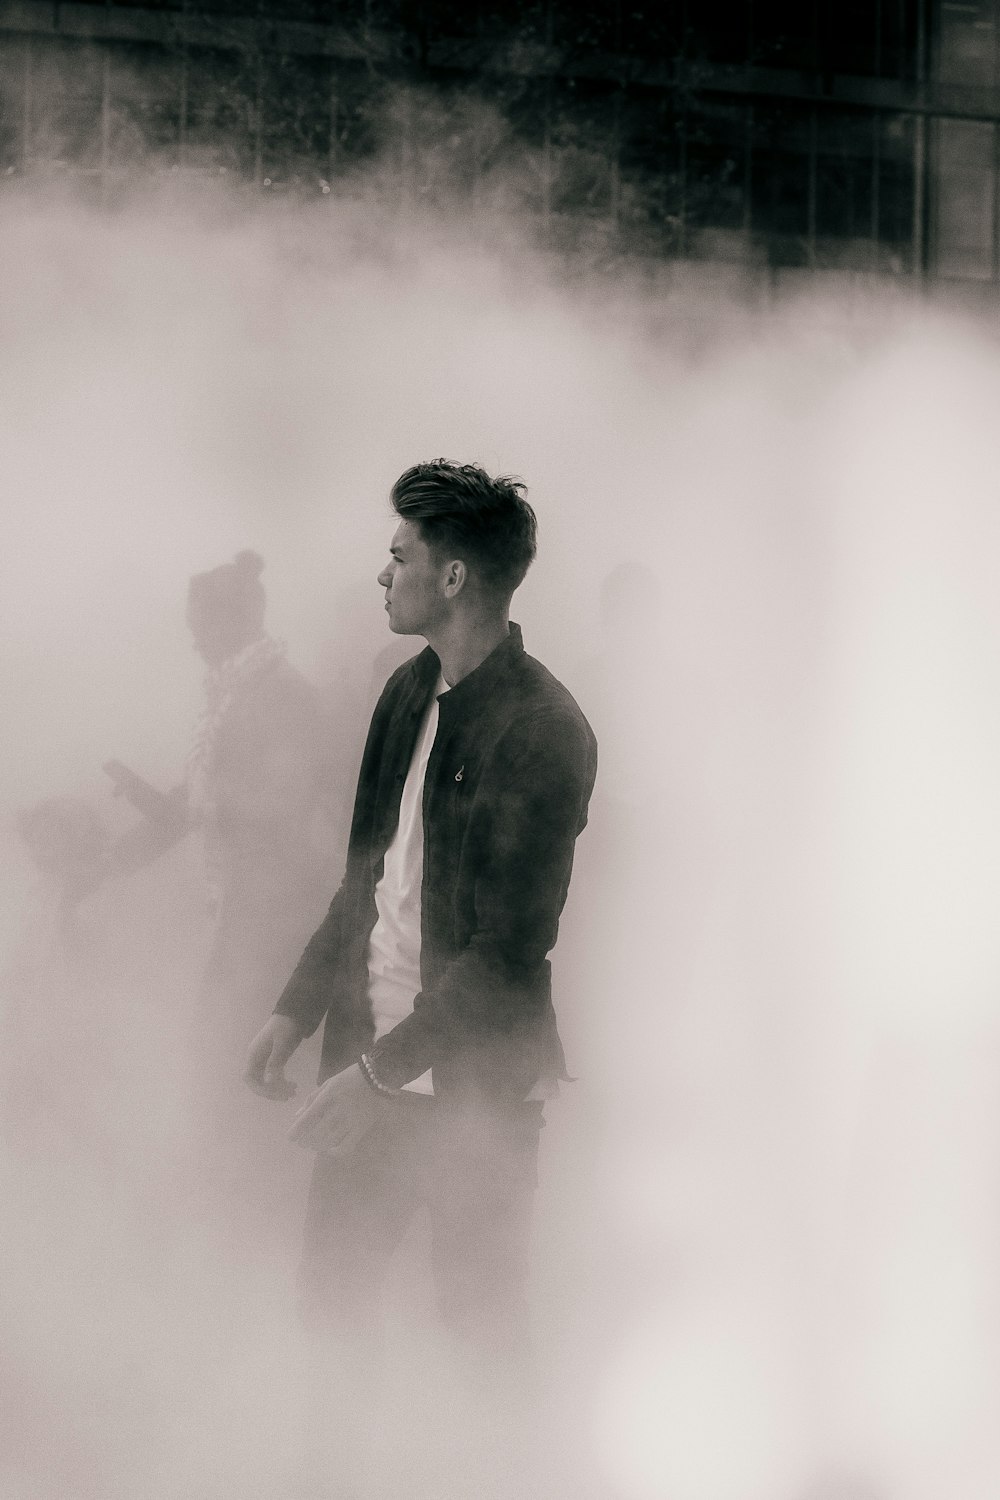 Fashionable man walks out of the fog away from the crowd